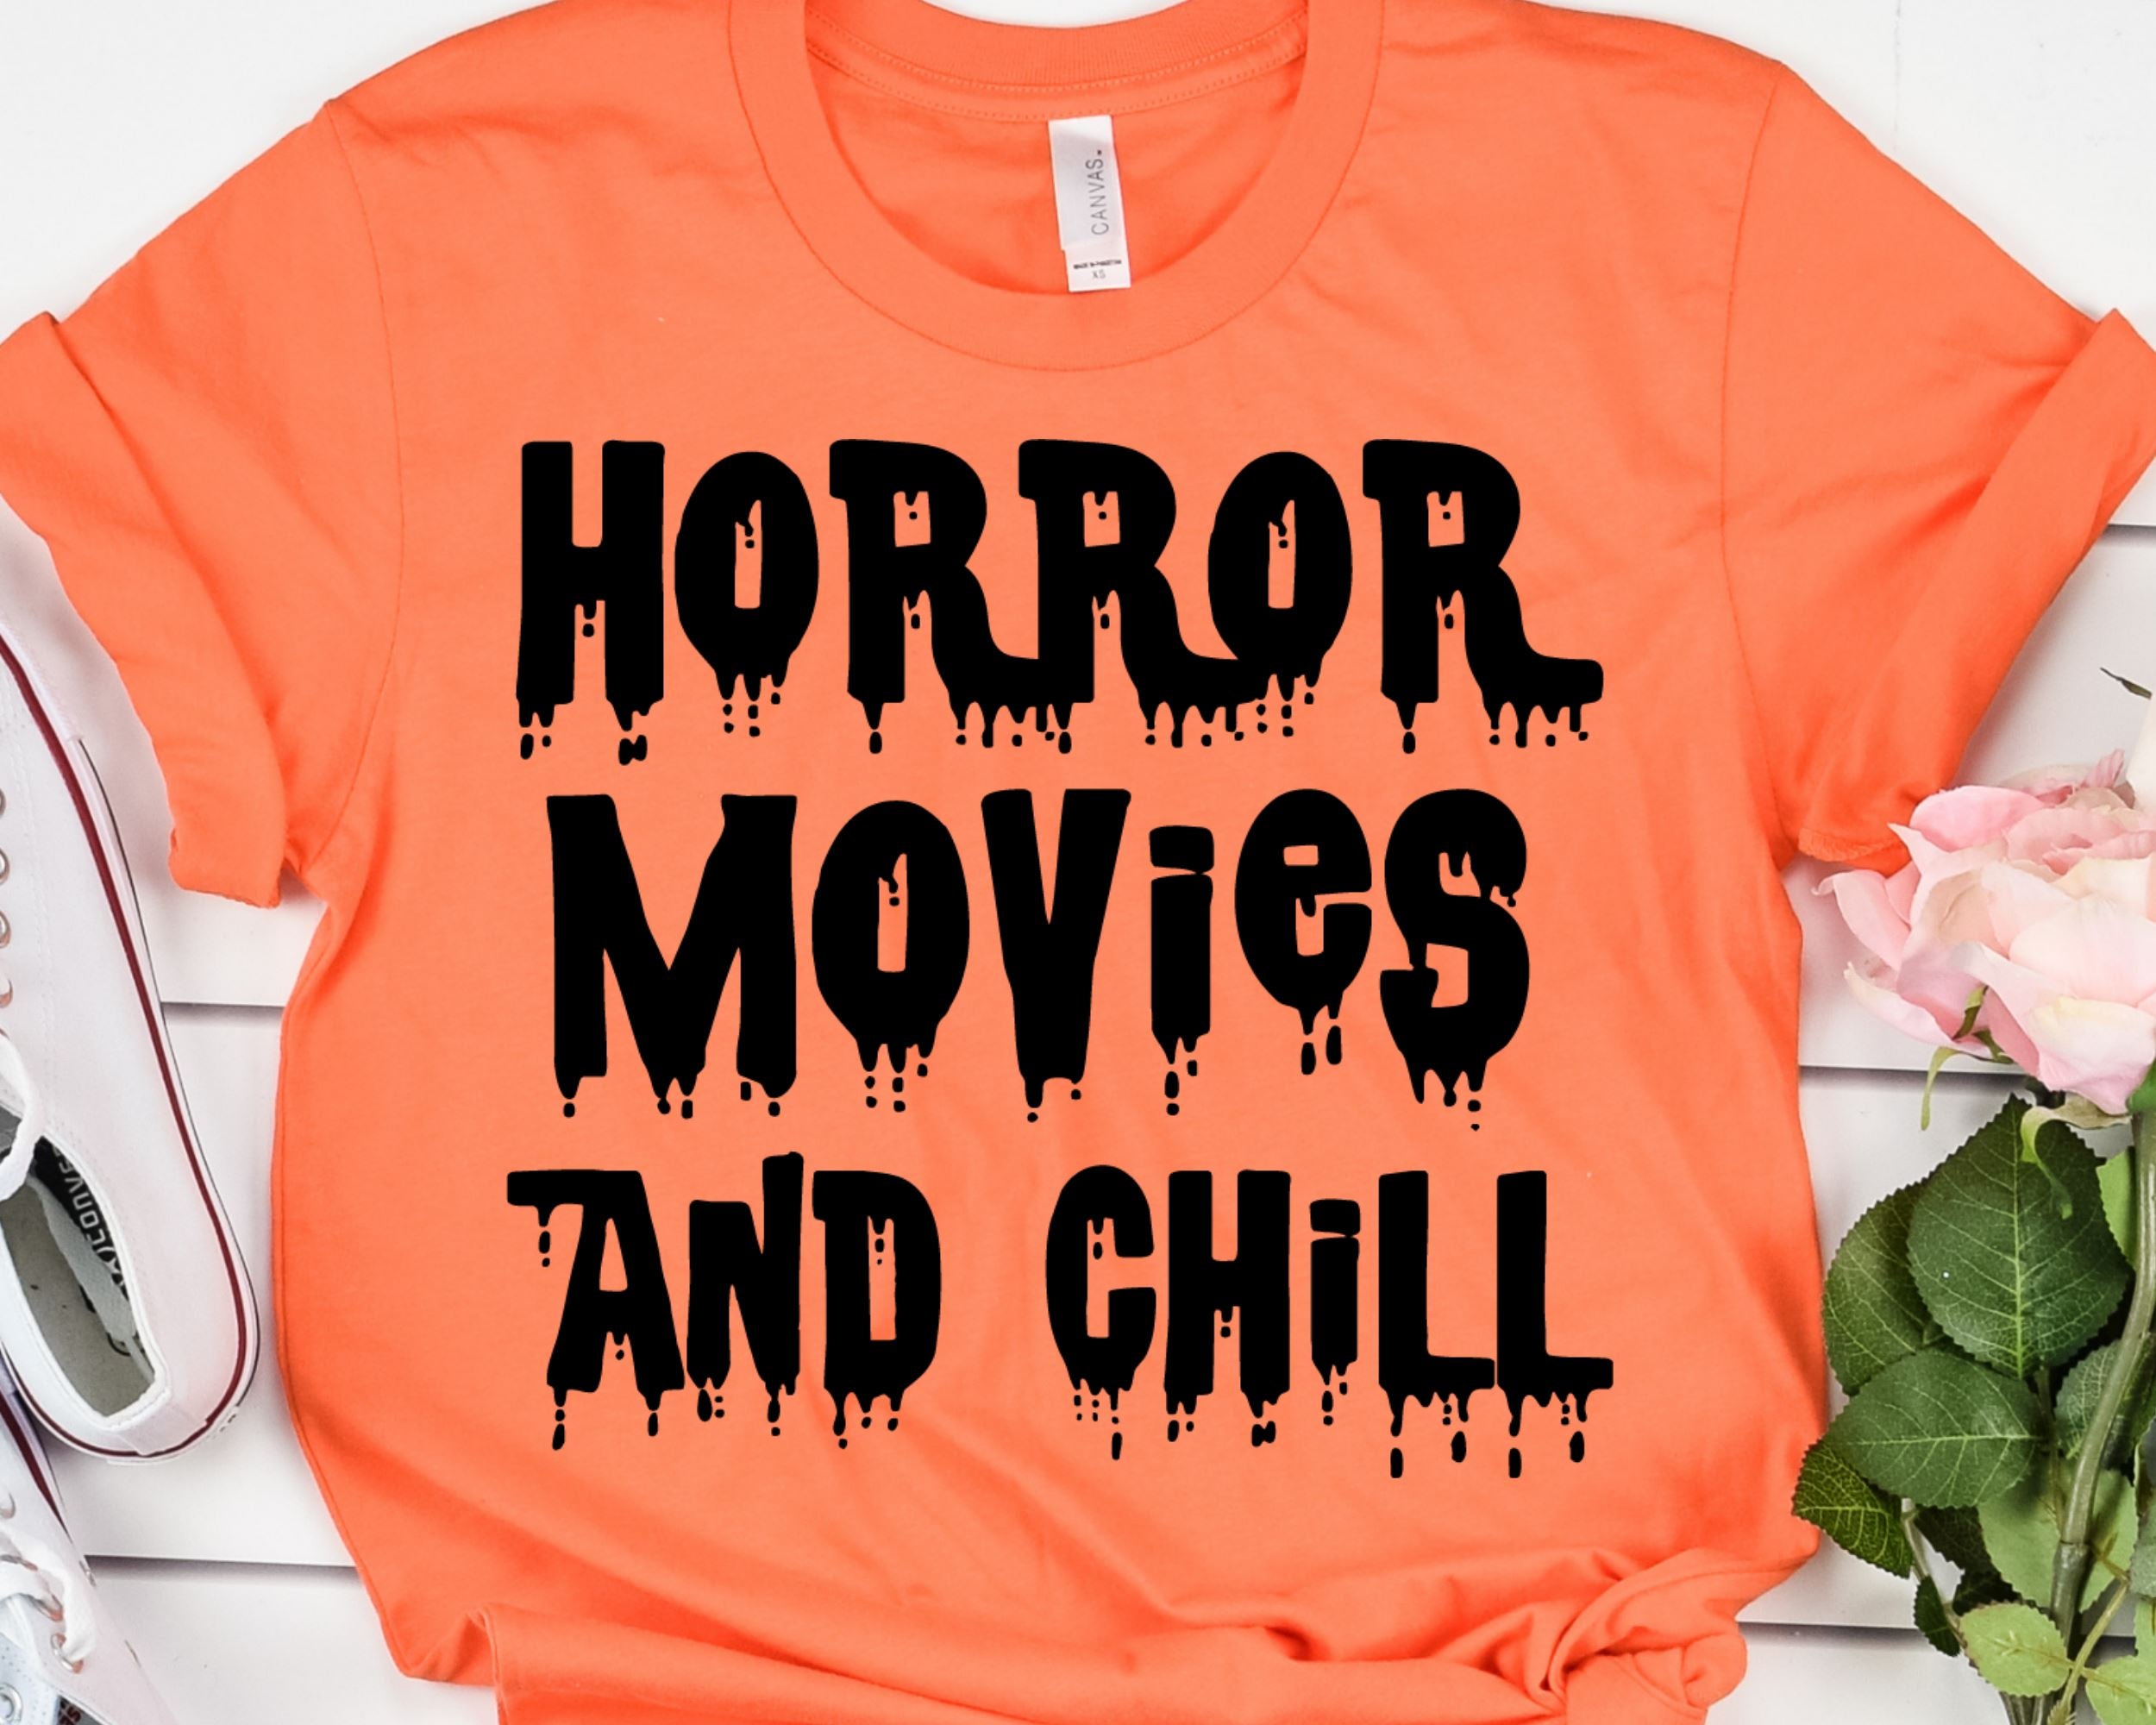 Download Halloween Svg Horror Movies And Chill Svg Halloween Shirt Svg Women S Halloween Svg Funny Halloween Svg Cutting File Halloween Cut File Kits How To Craft Supplies Tools Kromasol Com